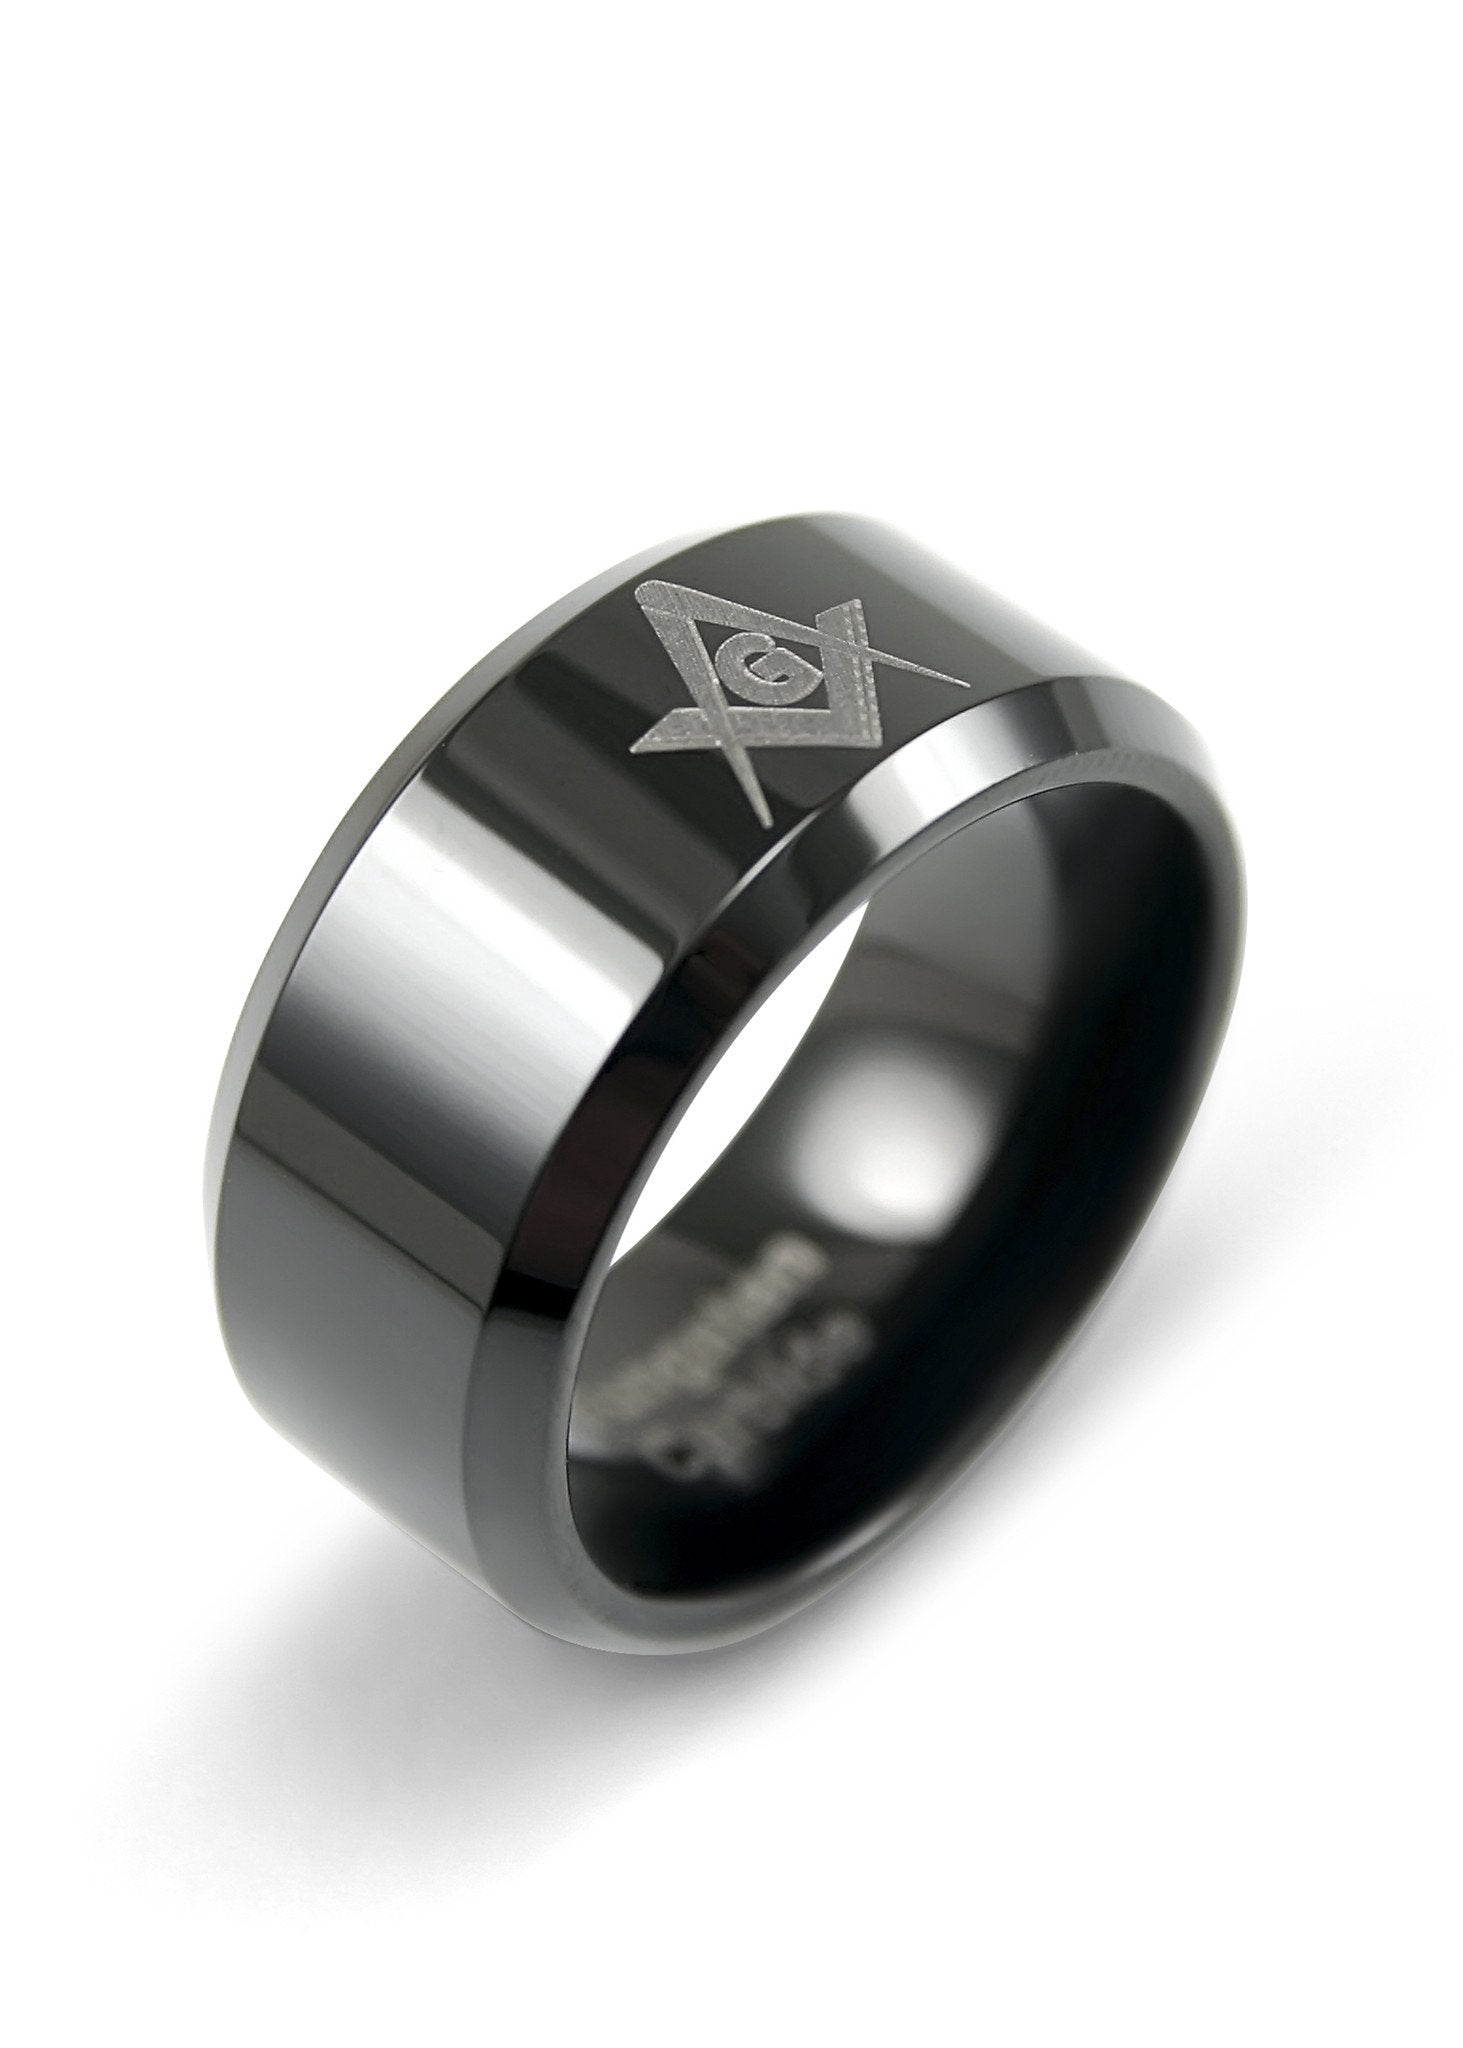 Masonic Black Tungsten Ring with Square and Compass